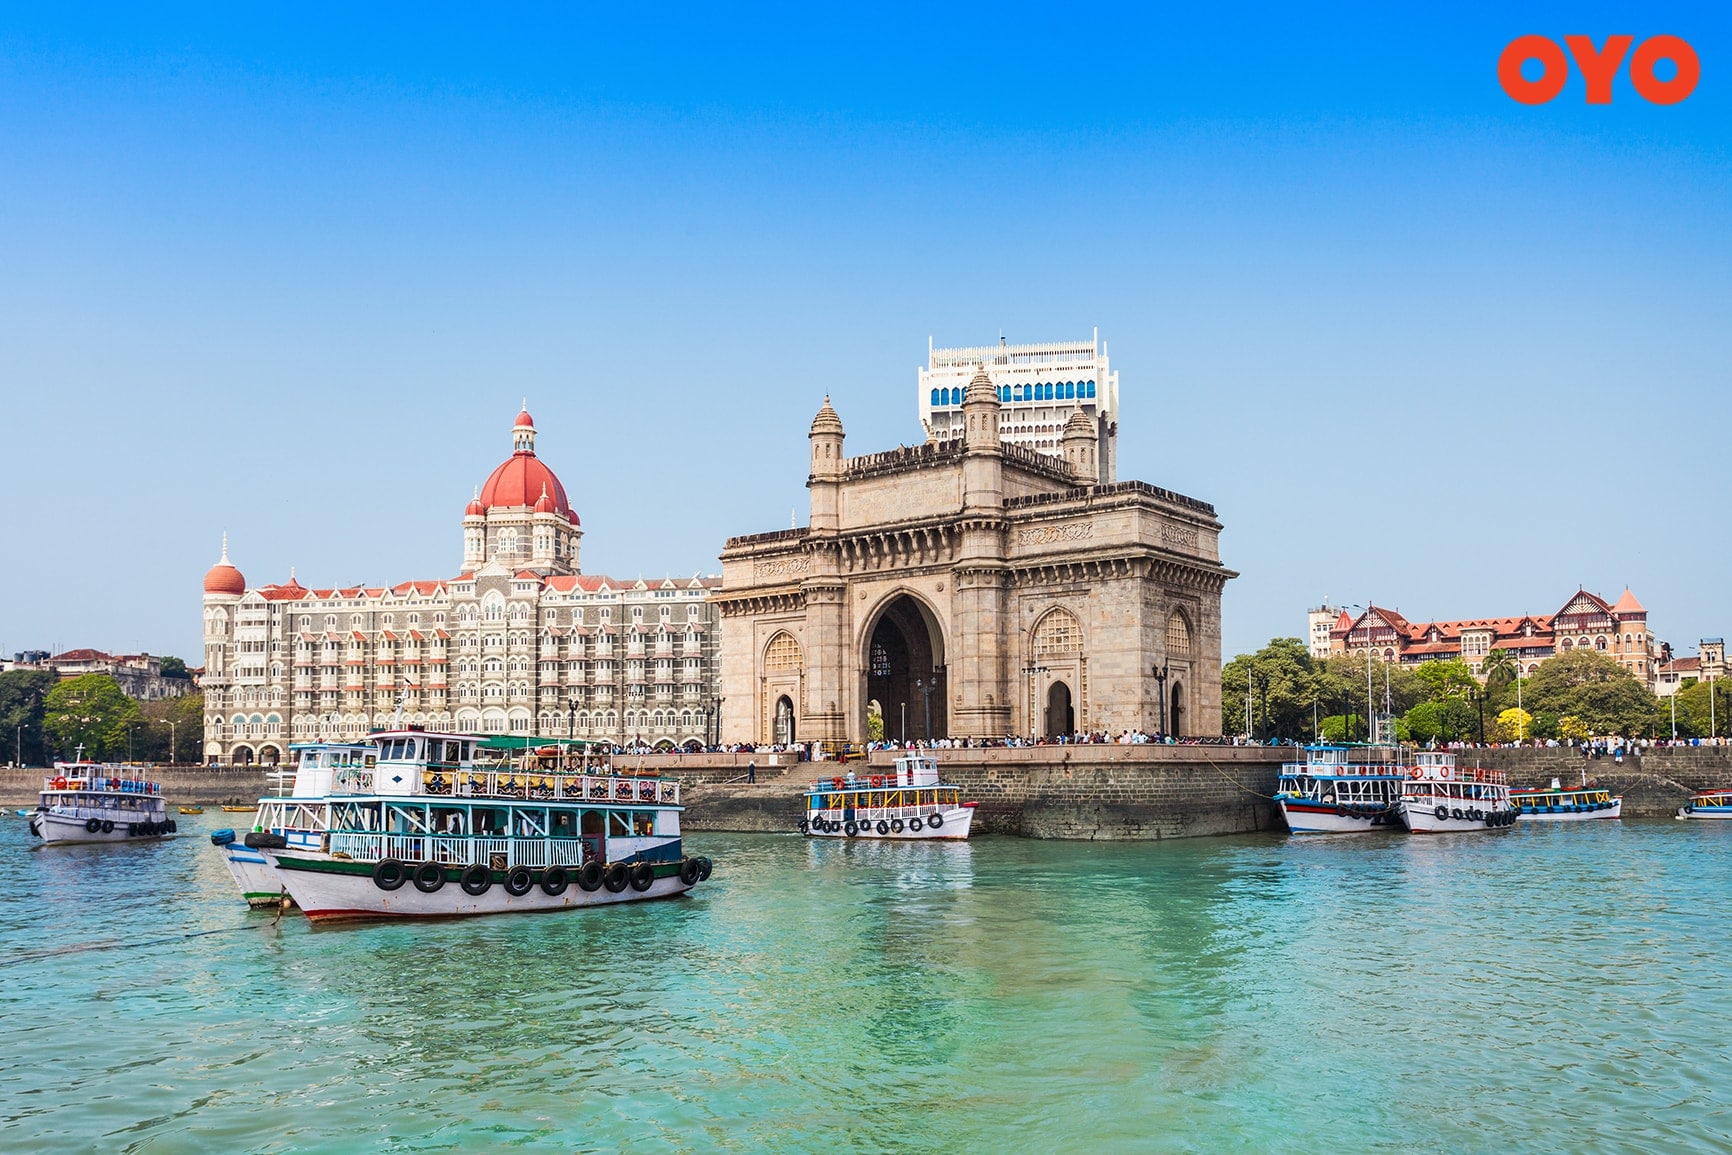 Gateway of India, Mumbai - one of the most popular historical places in India